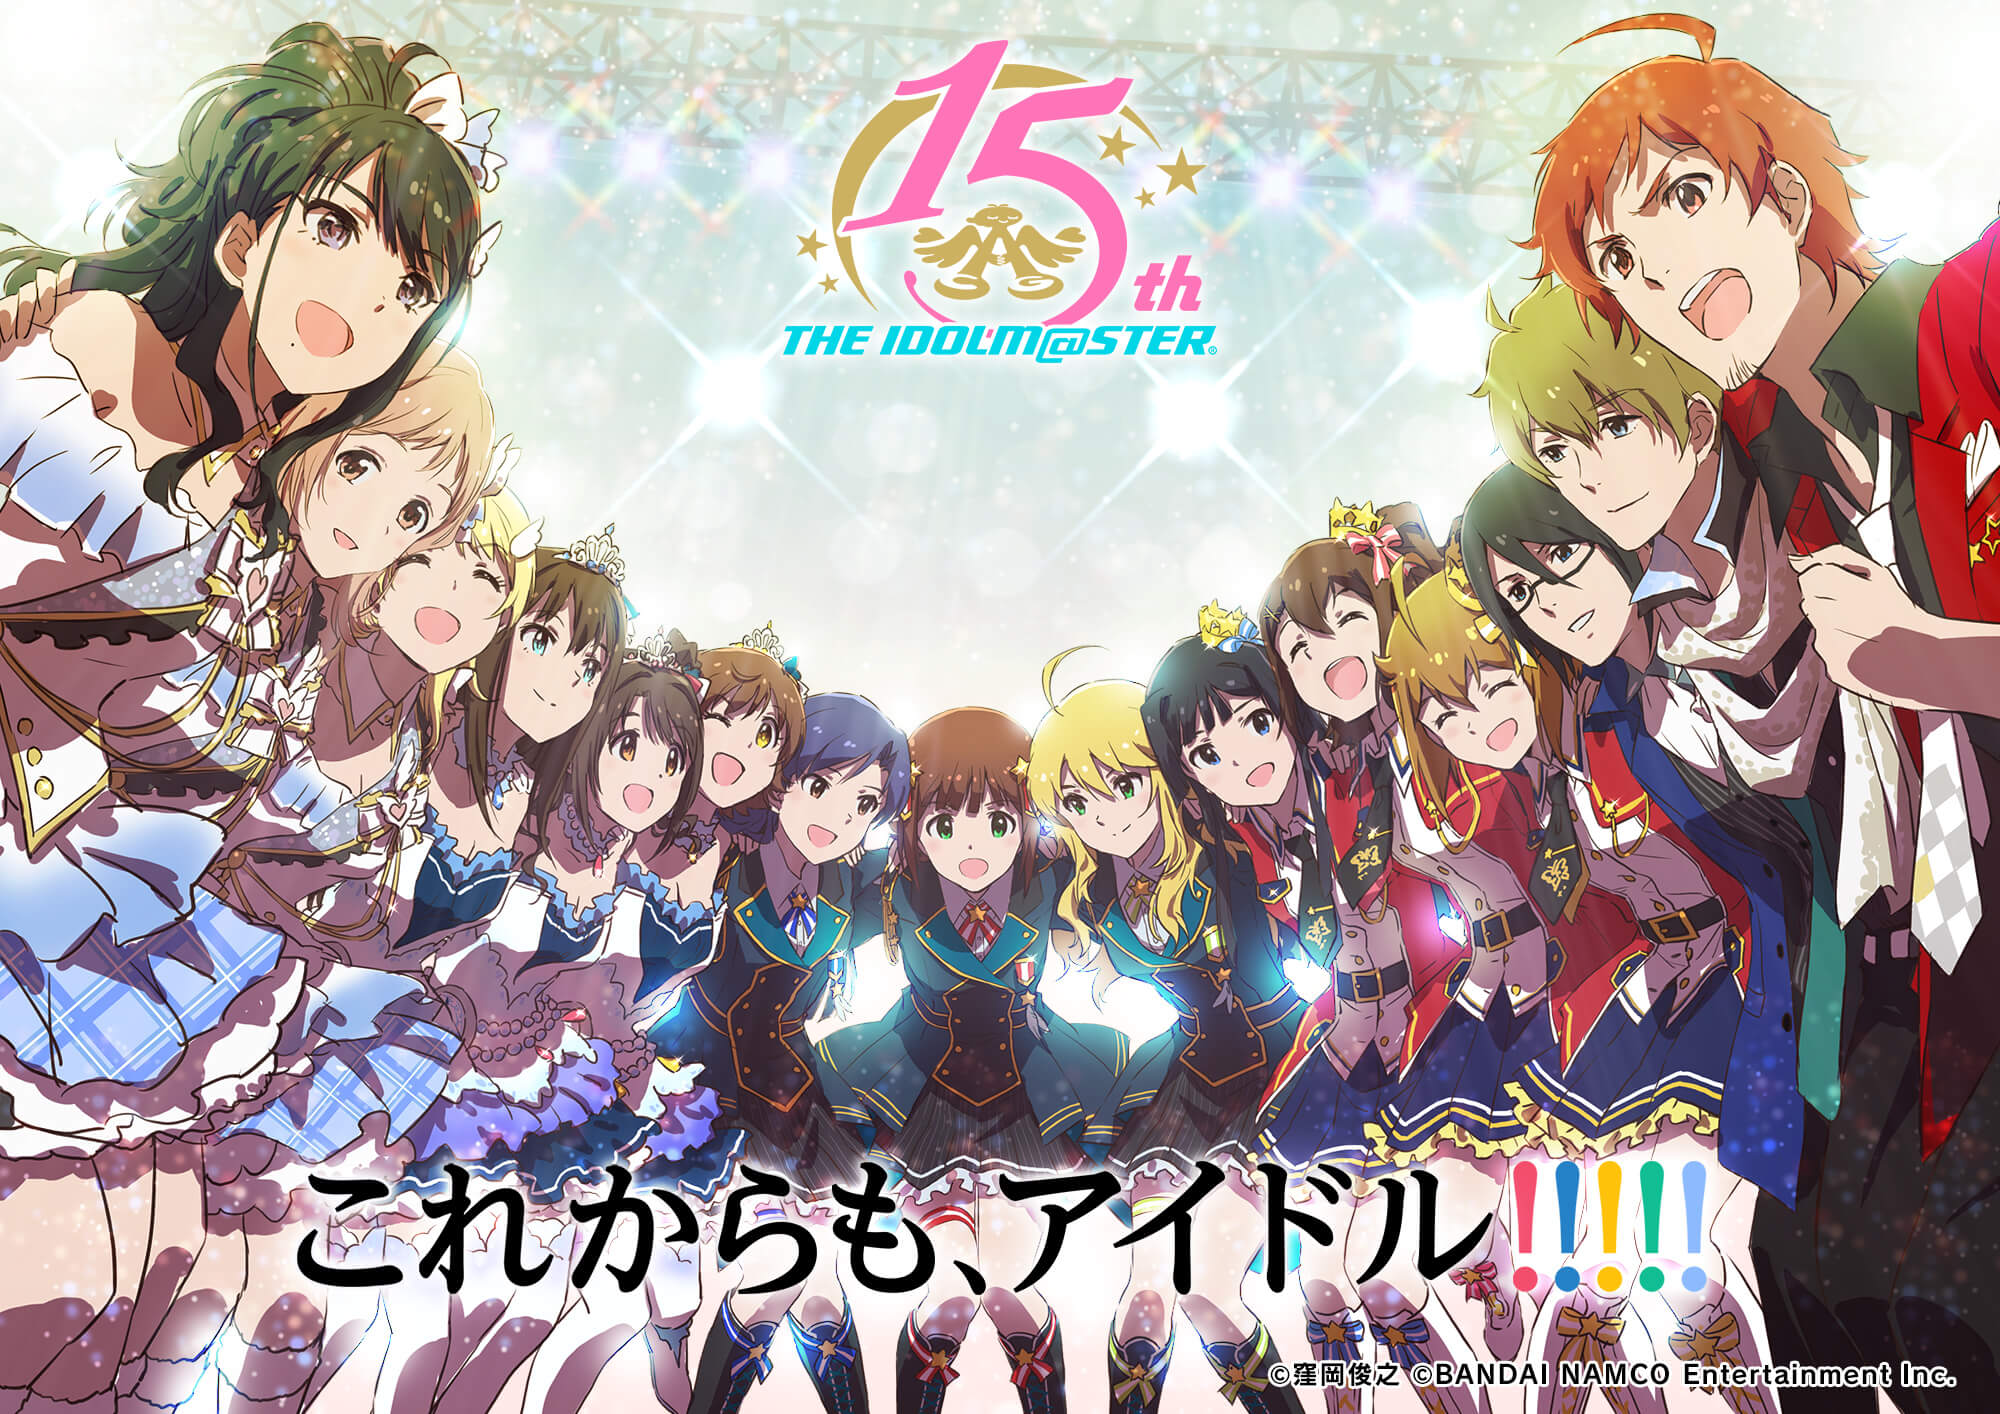 Shinycolors Eng And Finalement In Celebration Of The 15th Anniversary Of The Idolm Ster Franchise As A Whole A New Song Featuring The The Main Trios Of Each Subfranchise Has Been Announced